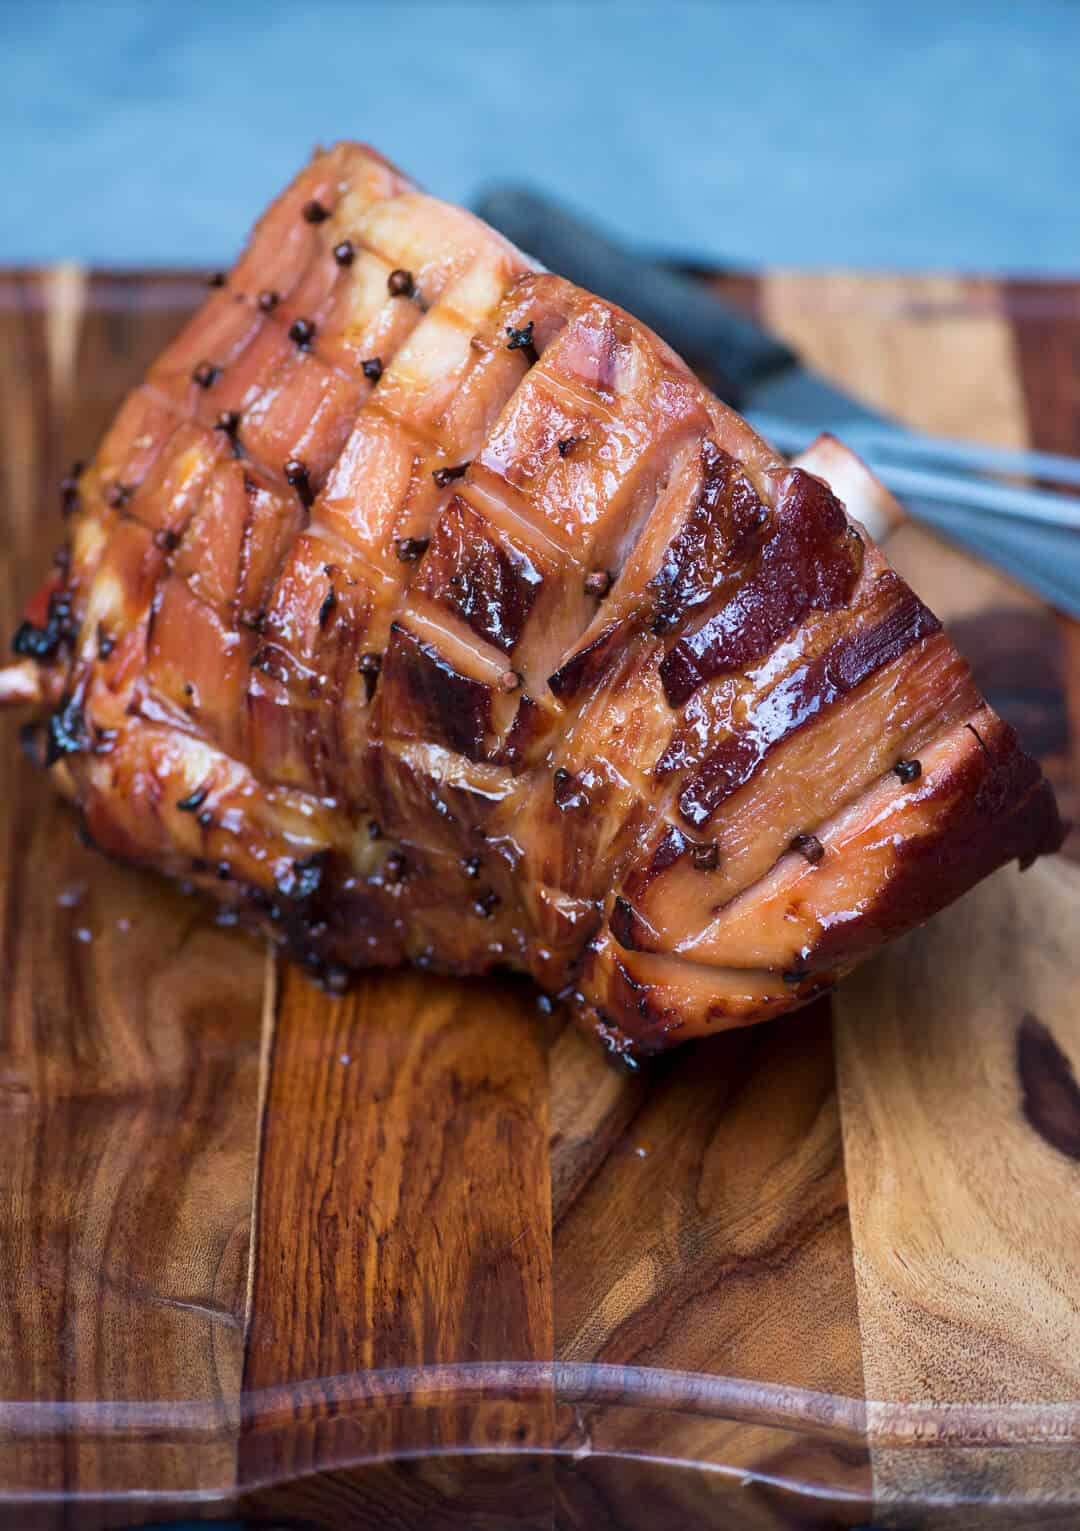 The roasted ham resting on a cutting board.